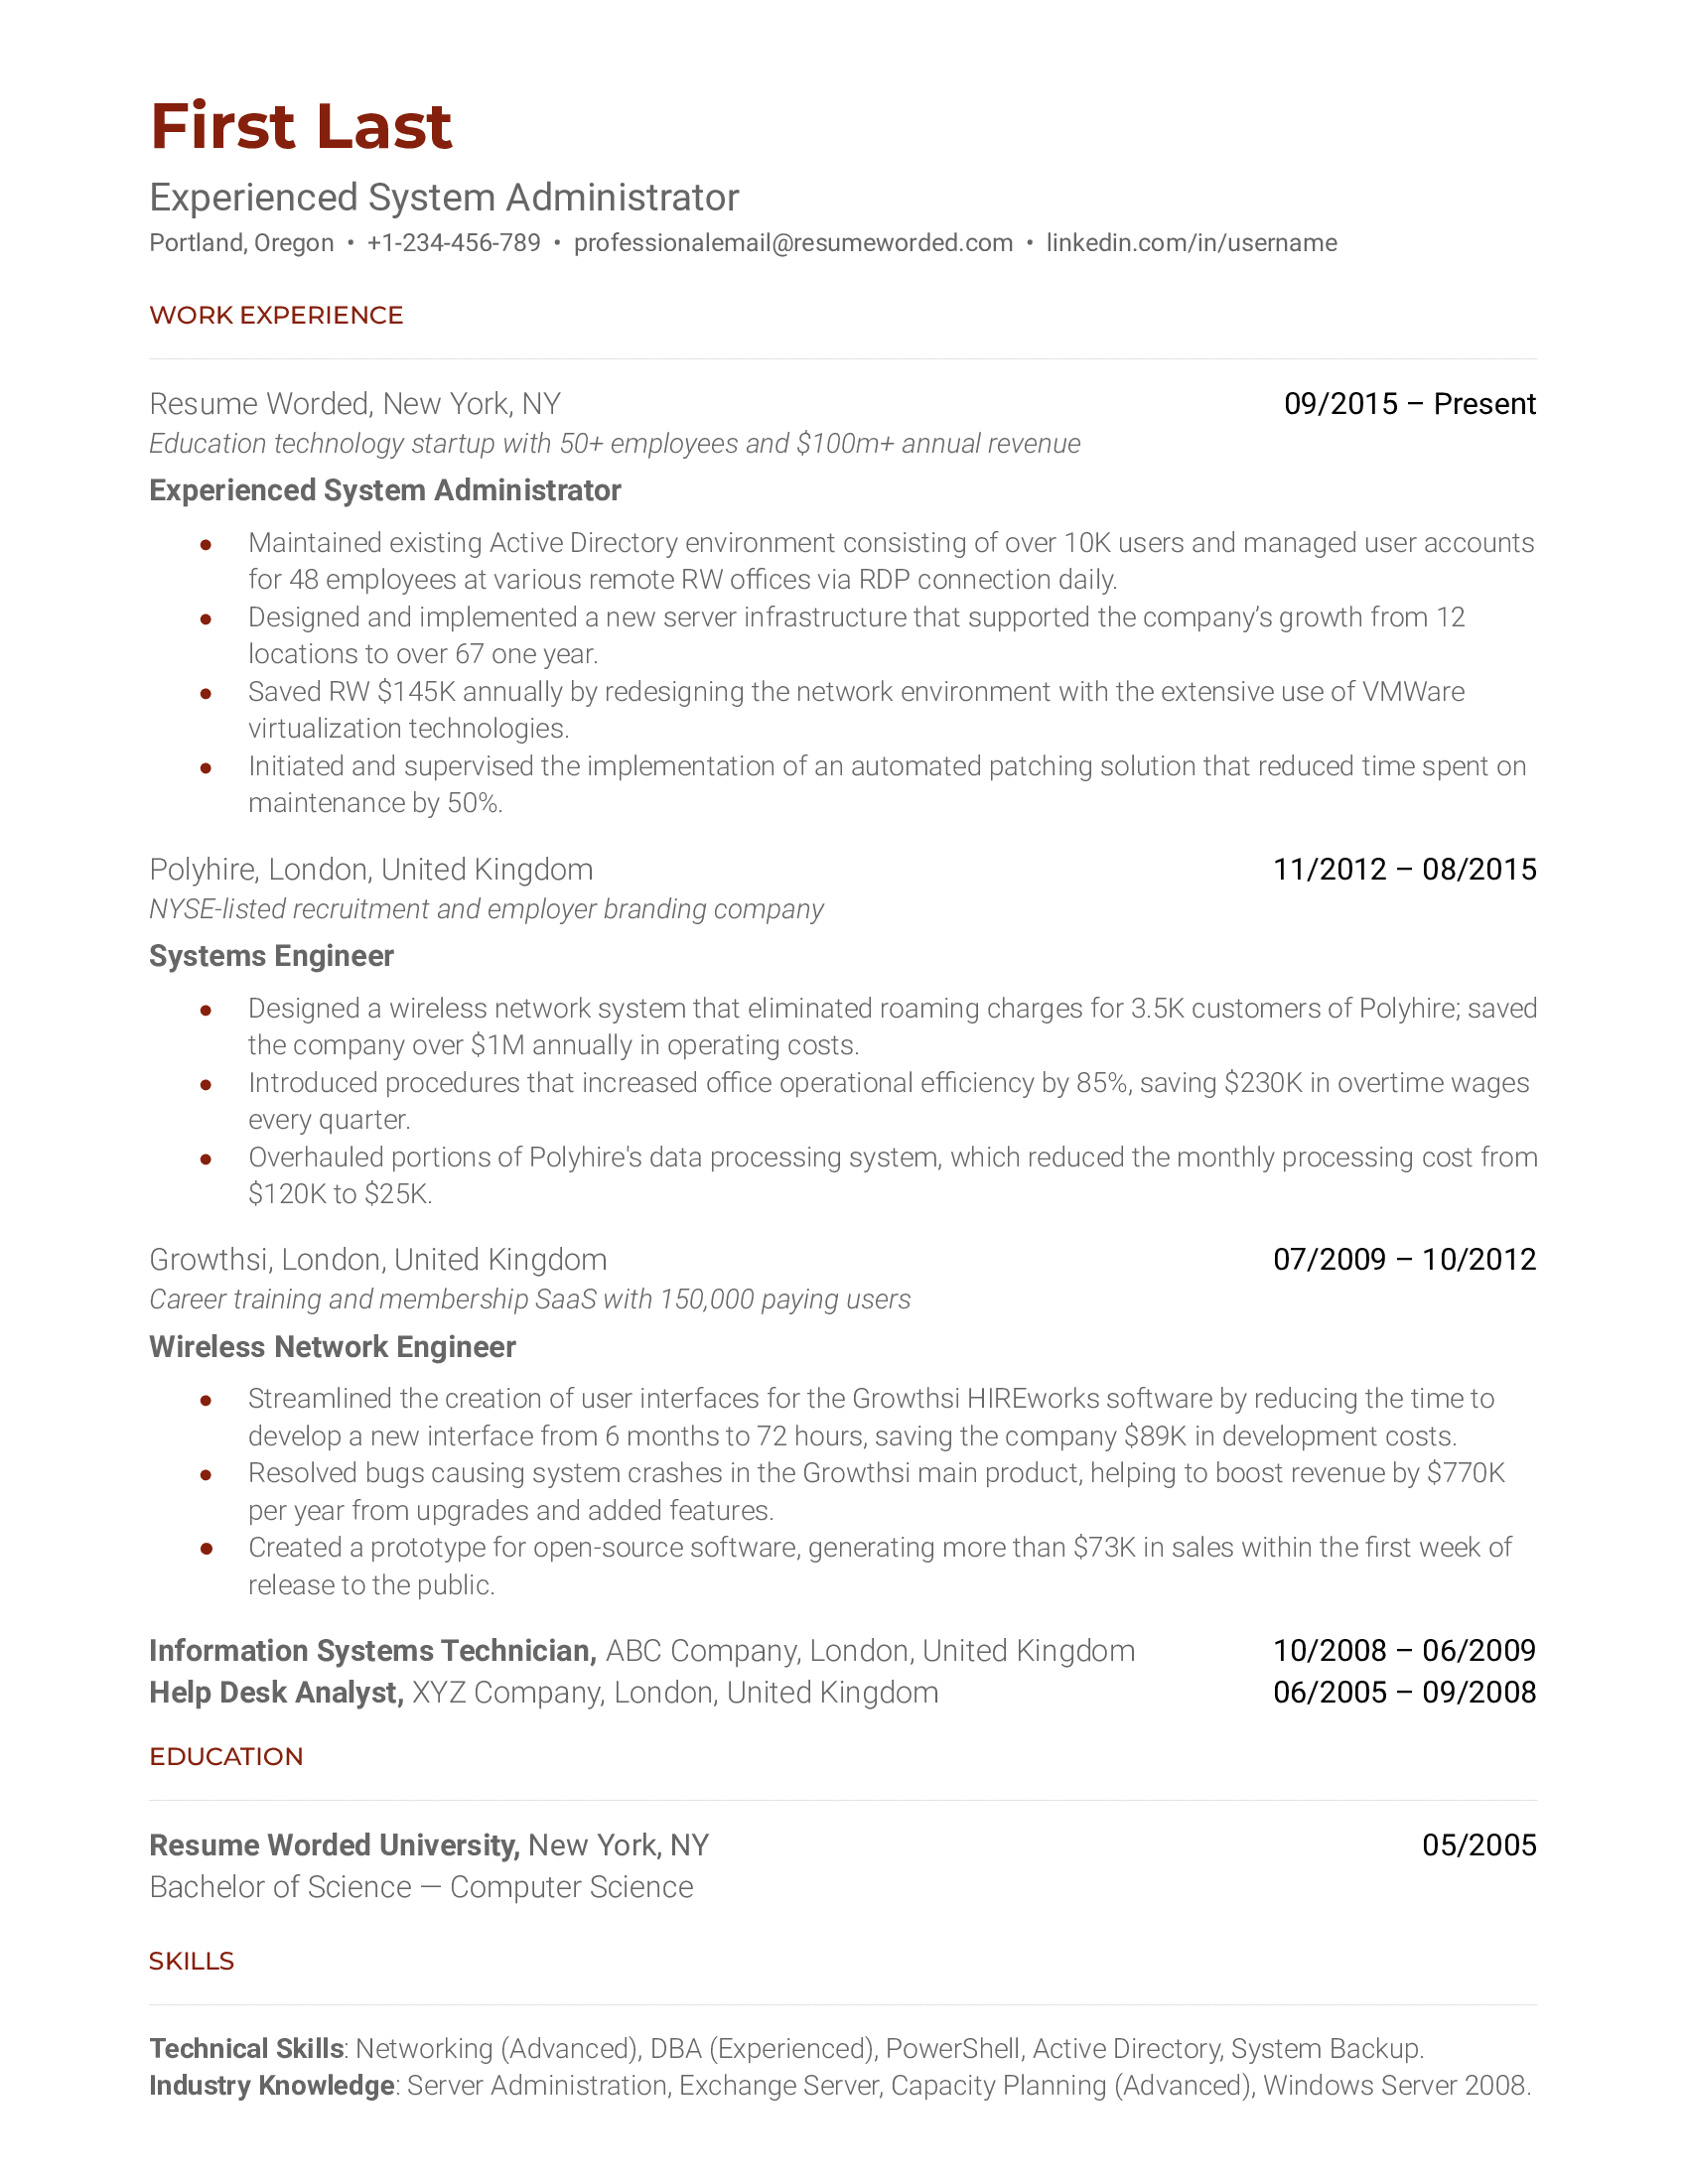 Experienced System Administrator Resume Sample